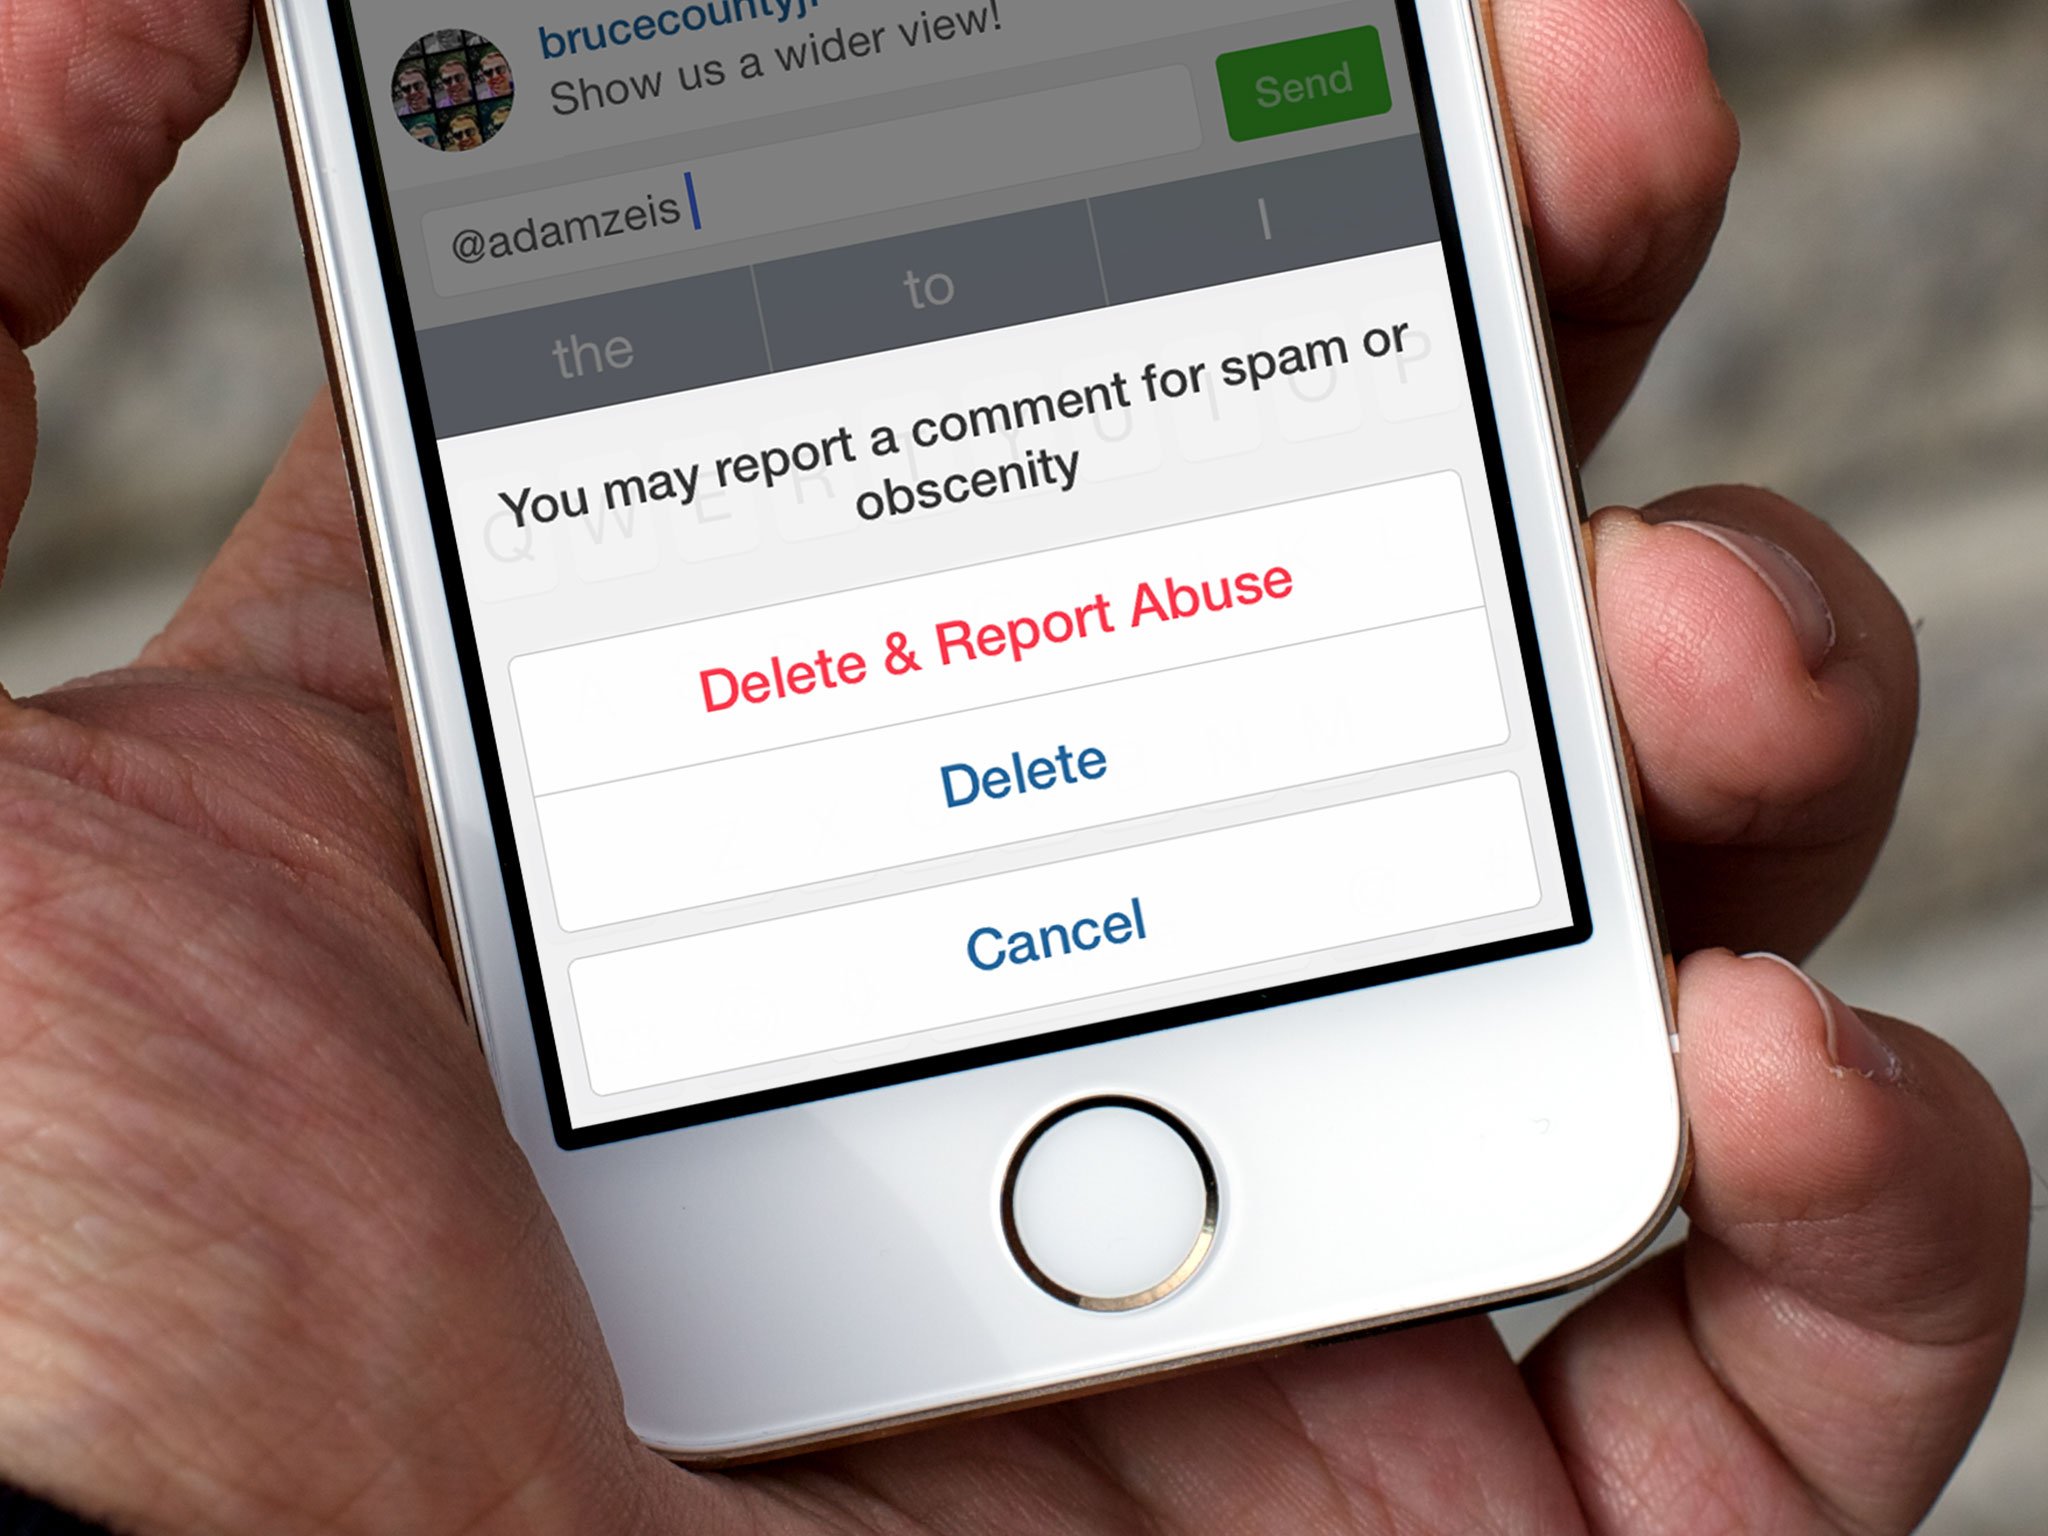 How do you delete comments on Instagram?